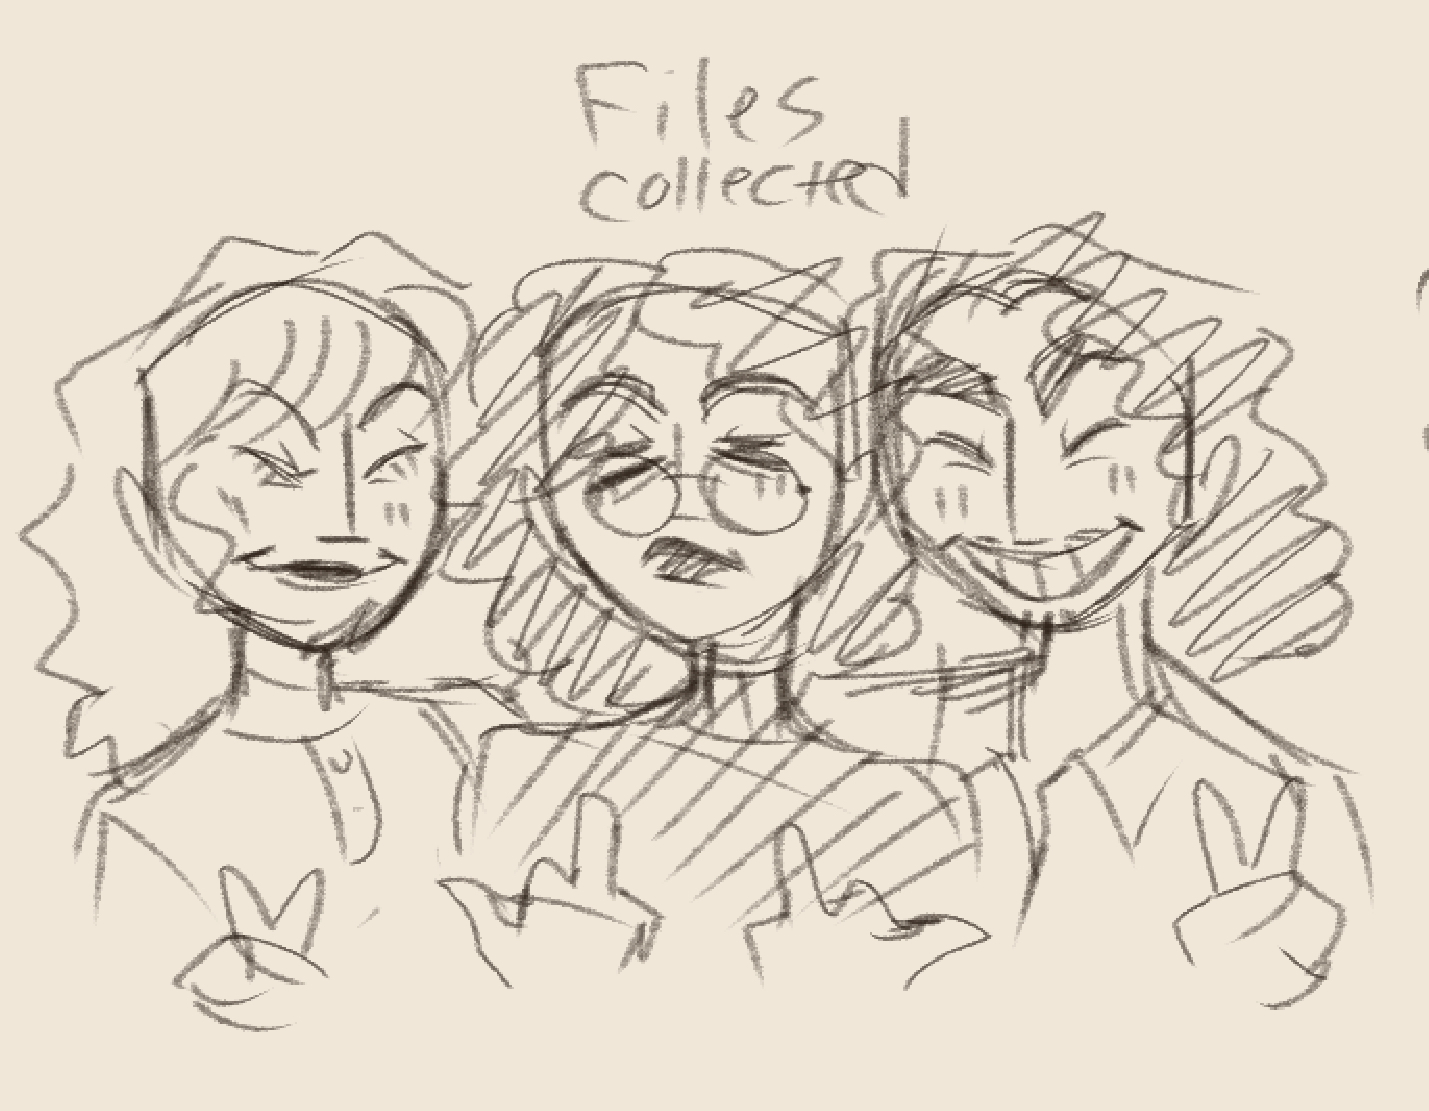 Collect their files 4 (The Walten Files)